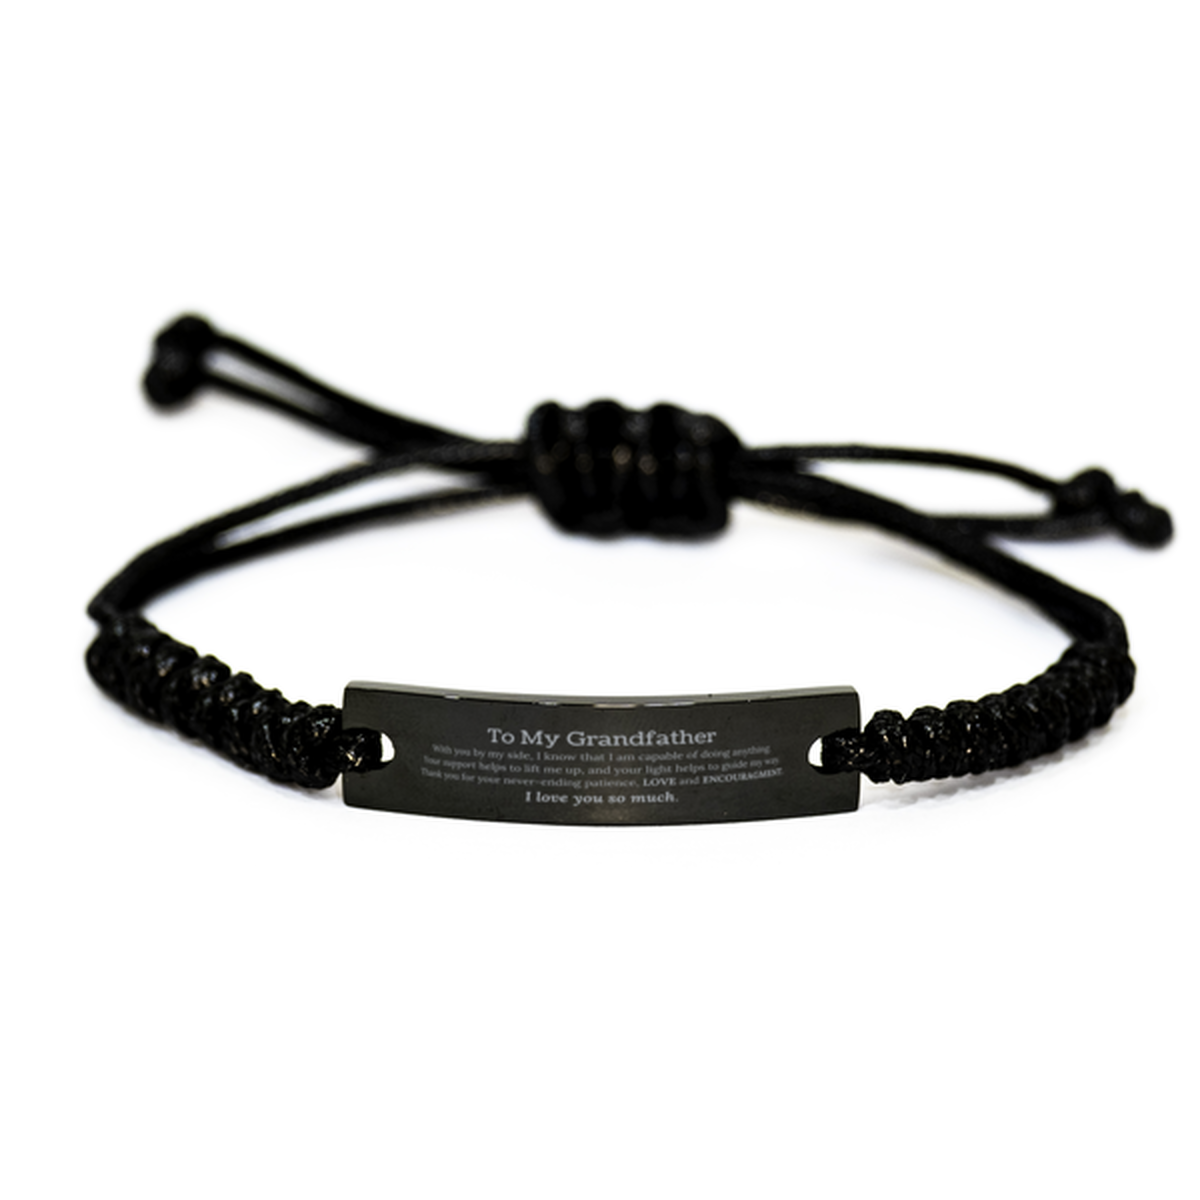 Appreciation Grandfather Black Rope Bracelet Gifts, To My Grandfather Birthday Christmas Wedding Keepsake Gifts for Grandfather With you by my side, I know that I am capable of doing anything. I love you so much